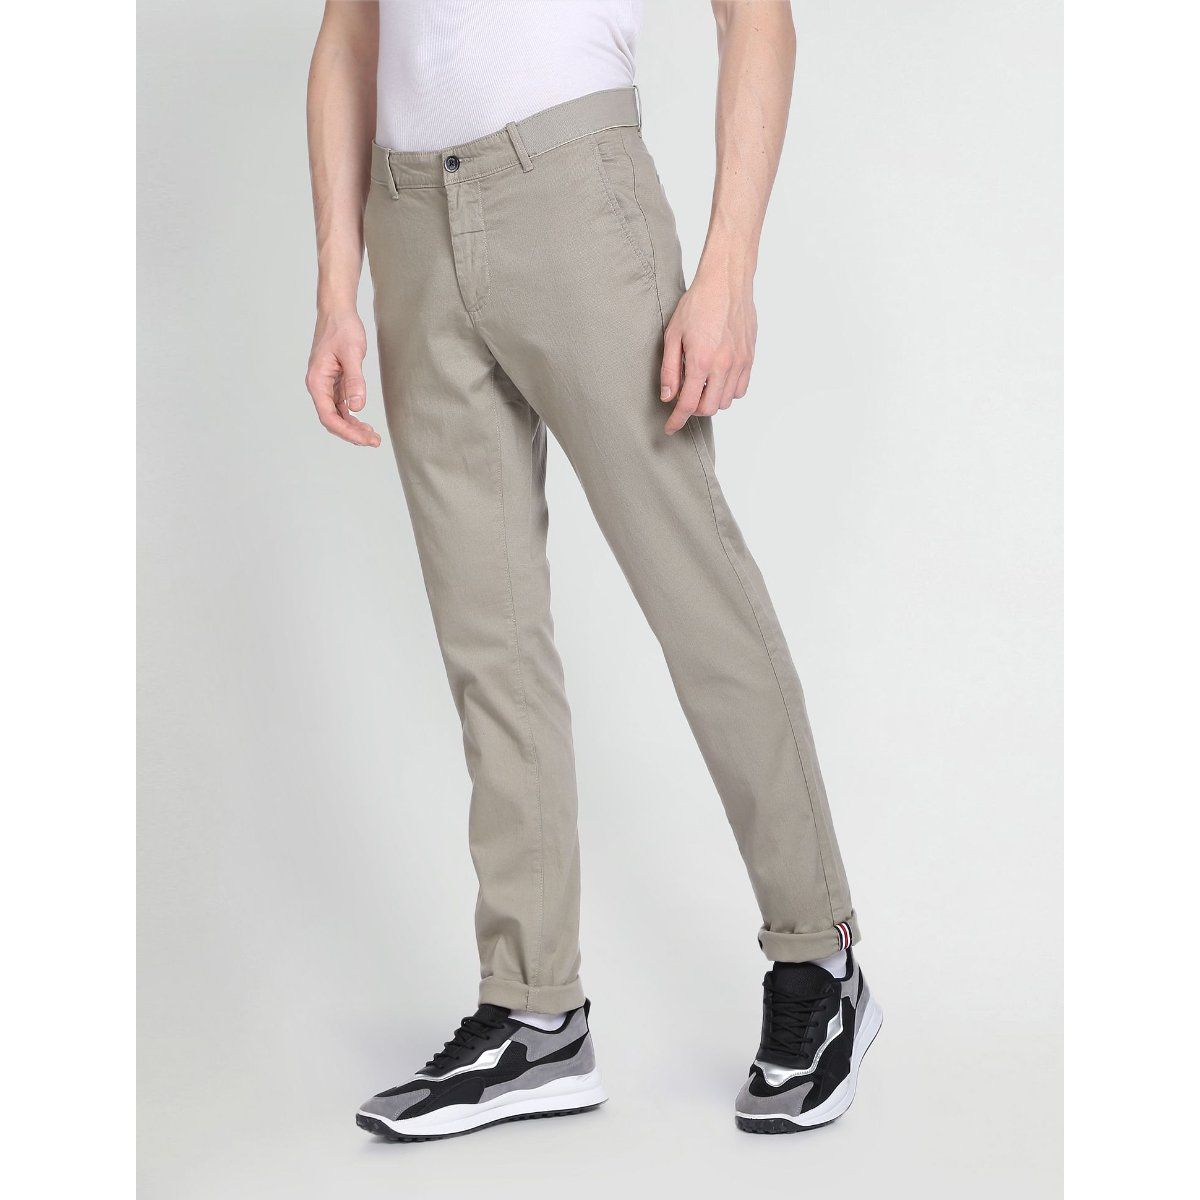 Buy latest Mens Casual Trousers from Arrow online in India  Top  Collection at LooksGudin  Looksgudin